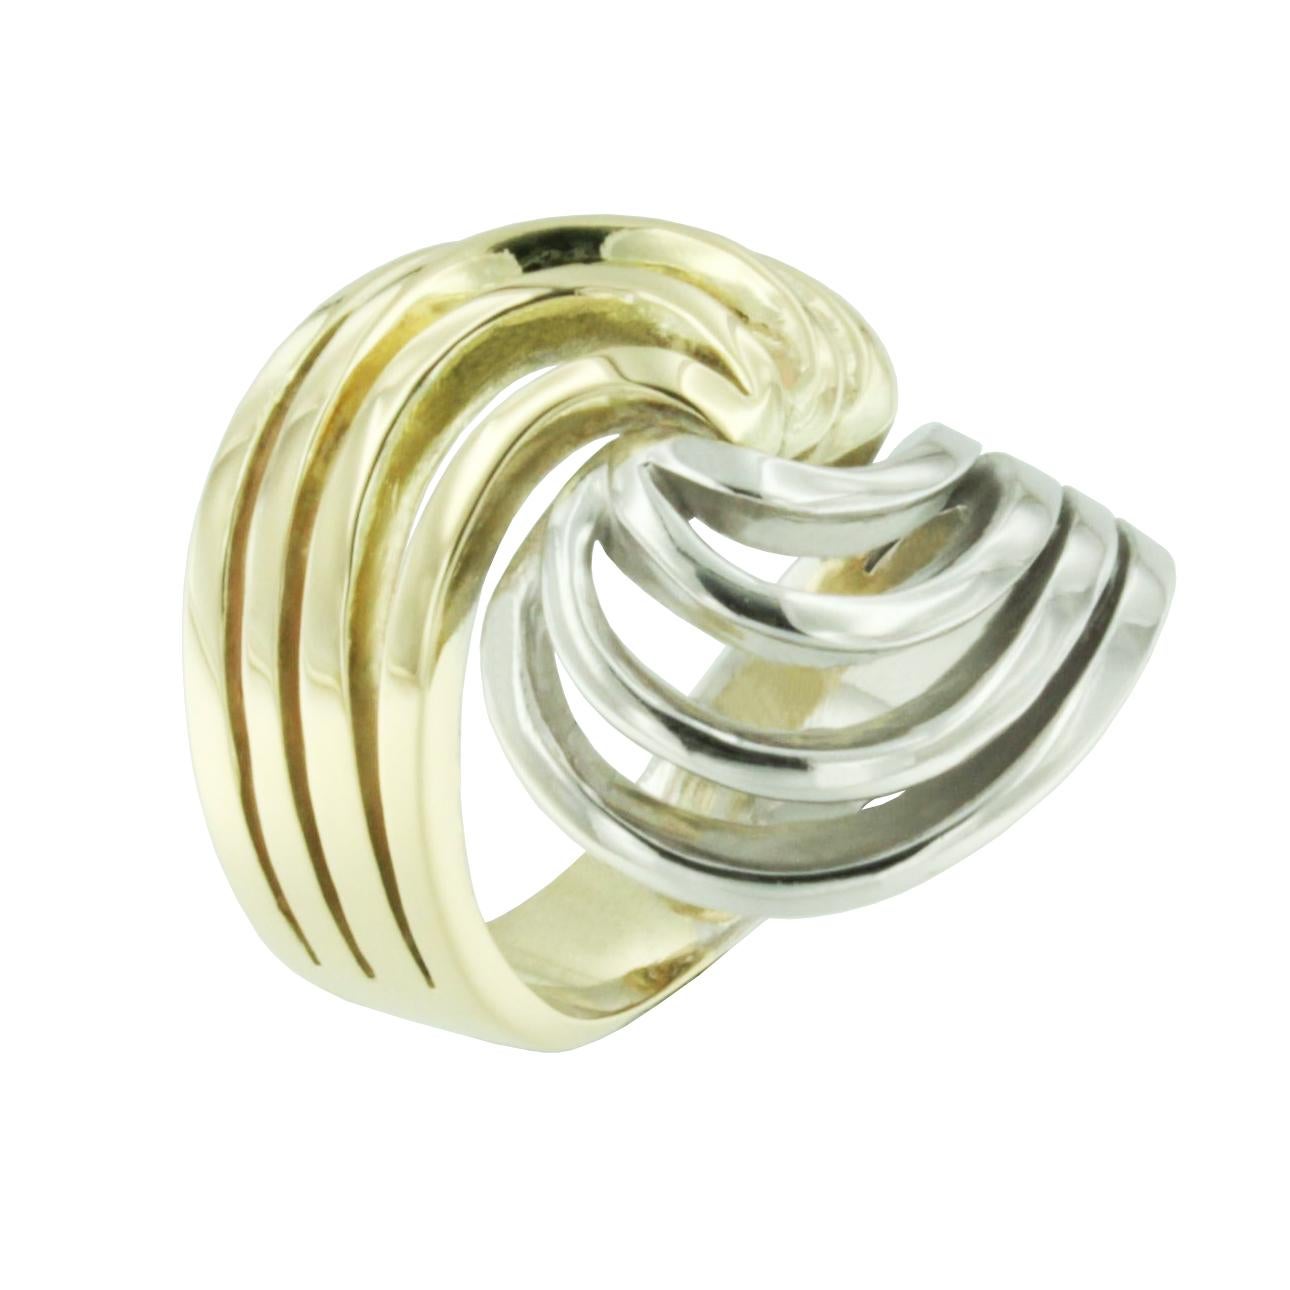 Ring in 14k white and yellow gold

Size of ring: EU 10 - USA 50

All Stanoppi Jewelry is new and has never been previously owned or worn. Each item will arrive at your door beautifully gift wrapped in Stanoppi  boxes, put inside an elegant pouch or